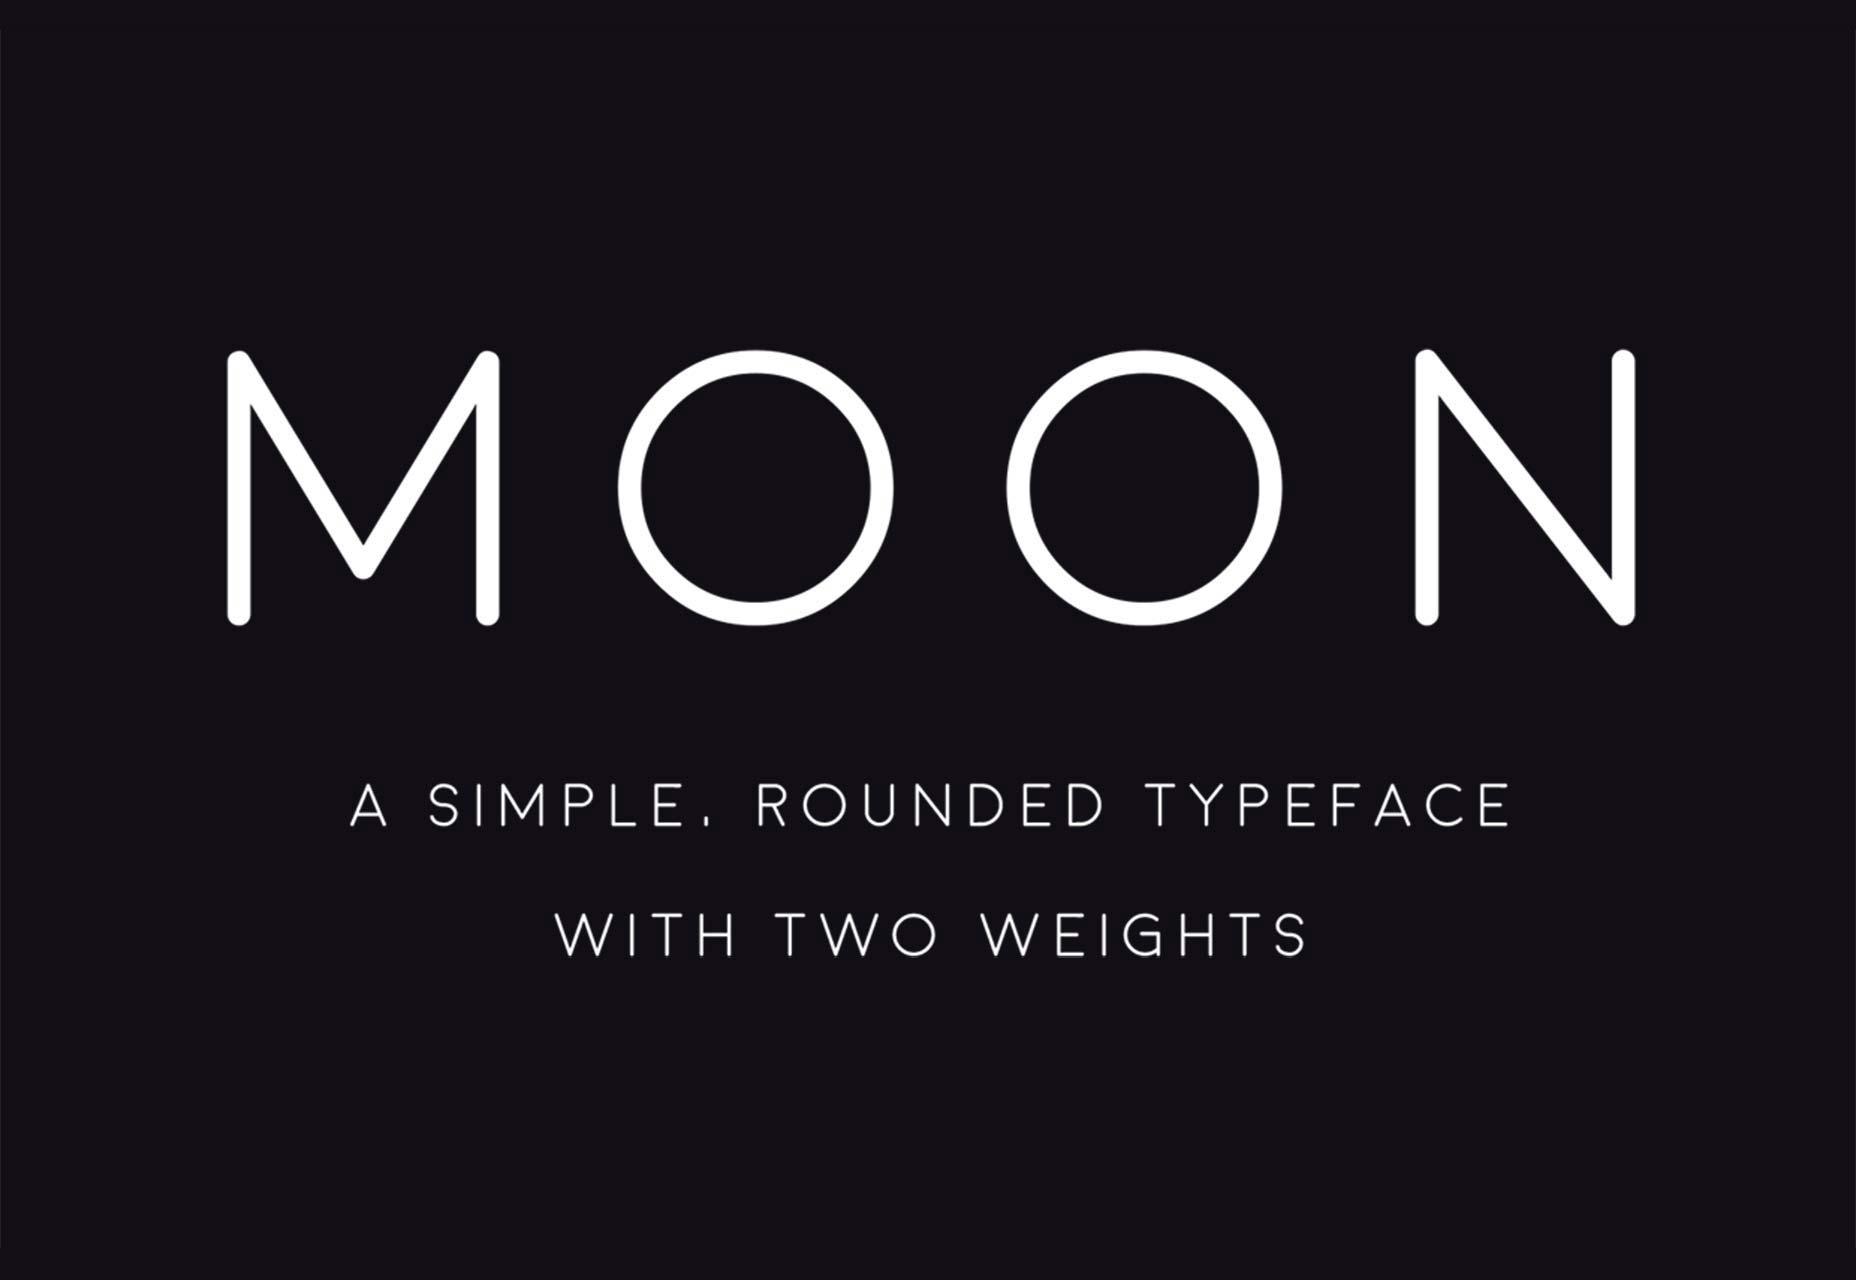 Moon free fonts for designers